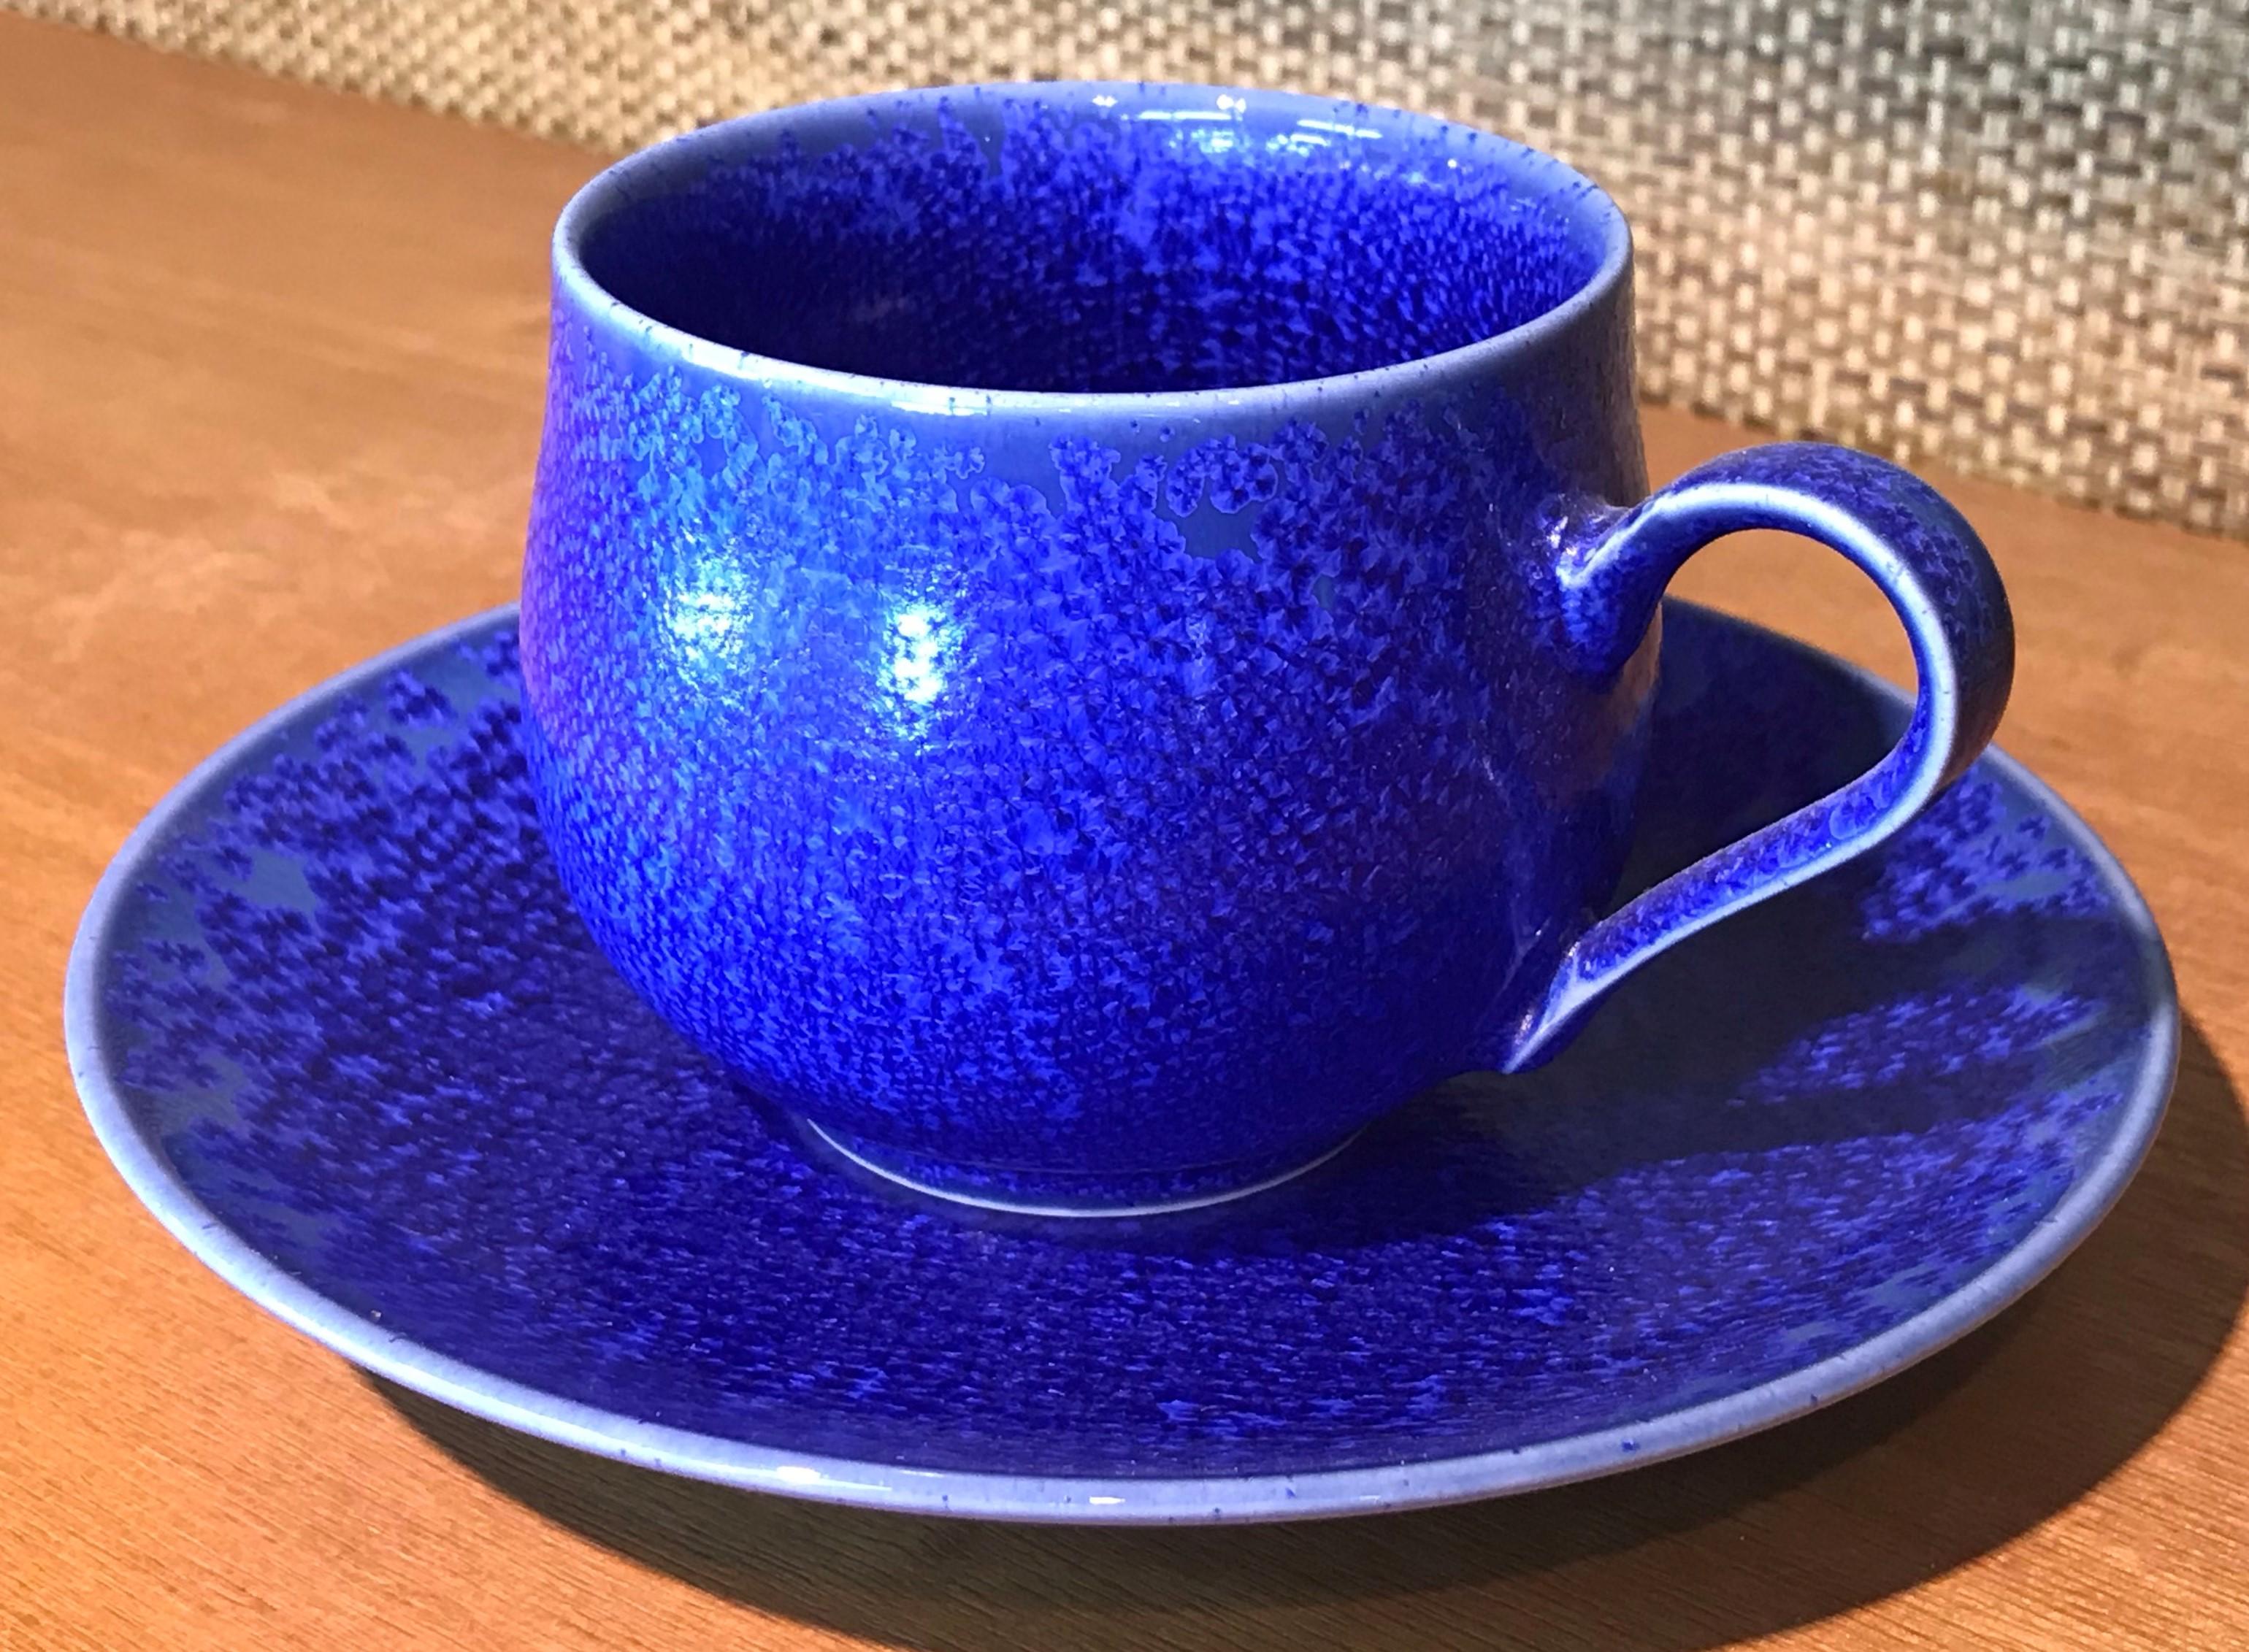 Exquisite Japanese contemporary porcelain cup and saucer, hand-glazed in striking signature royal blue, a signed work by highly acclaimed award-winning master porcelain artist from the Imari-Arita region of Japan. 

In this extraordinary piece, a